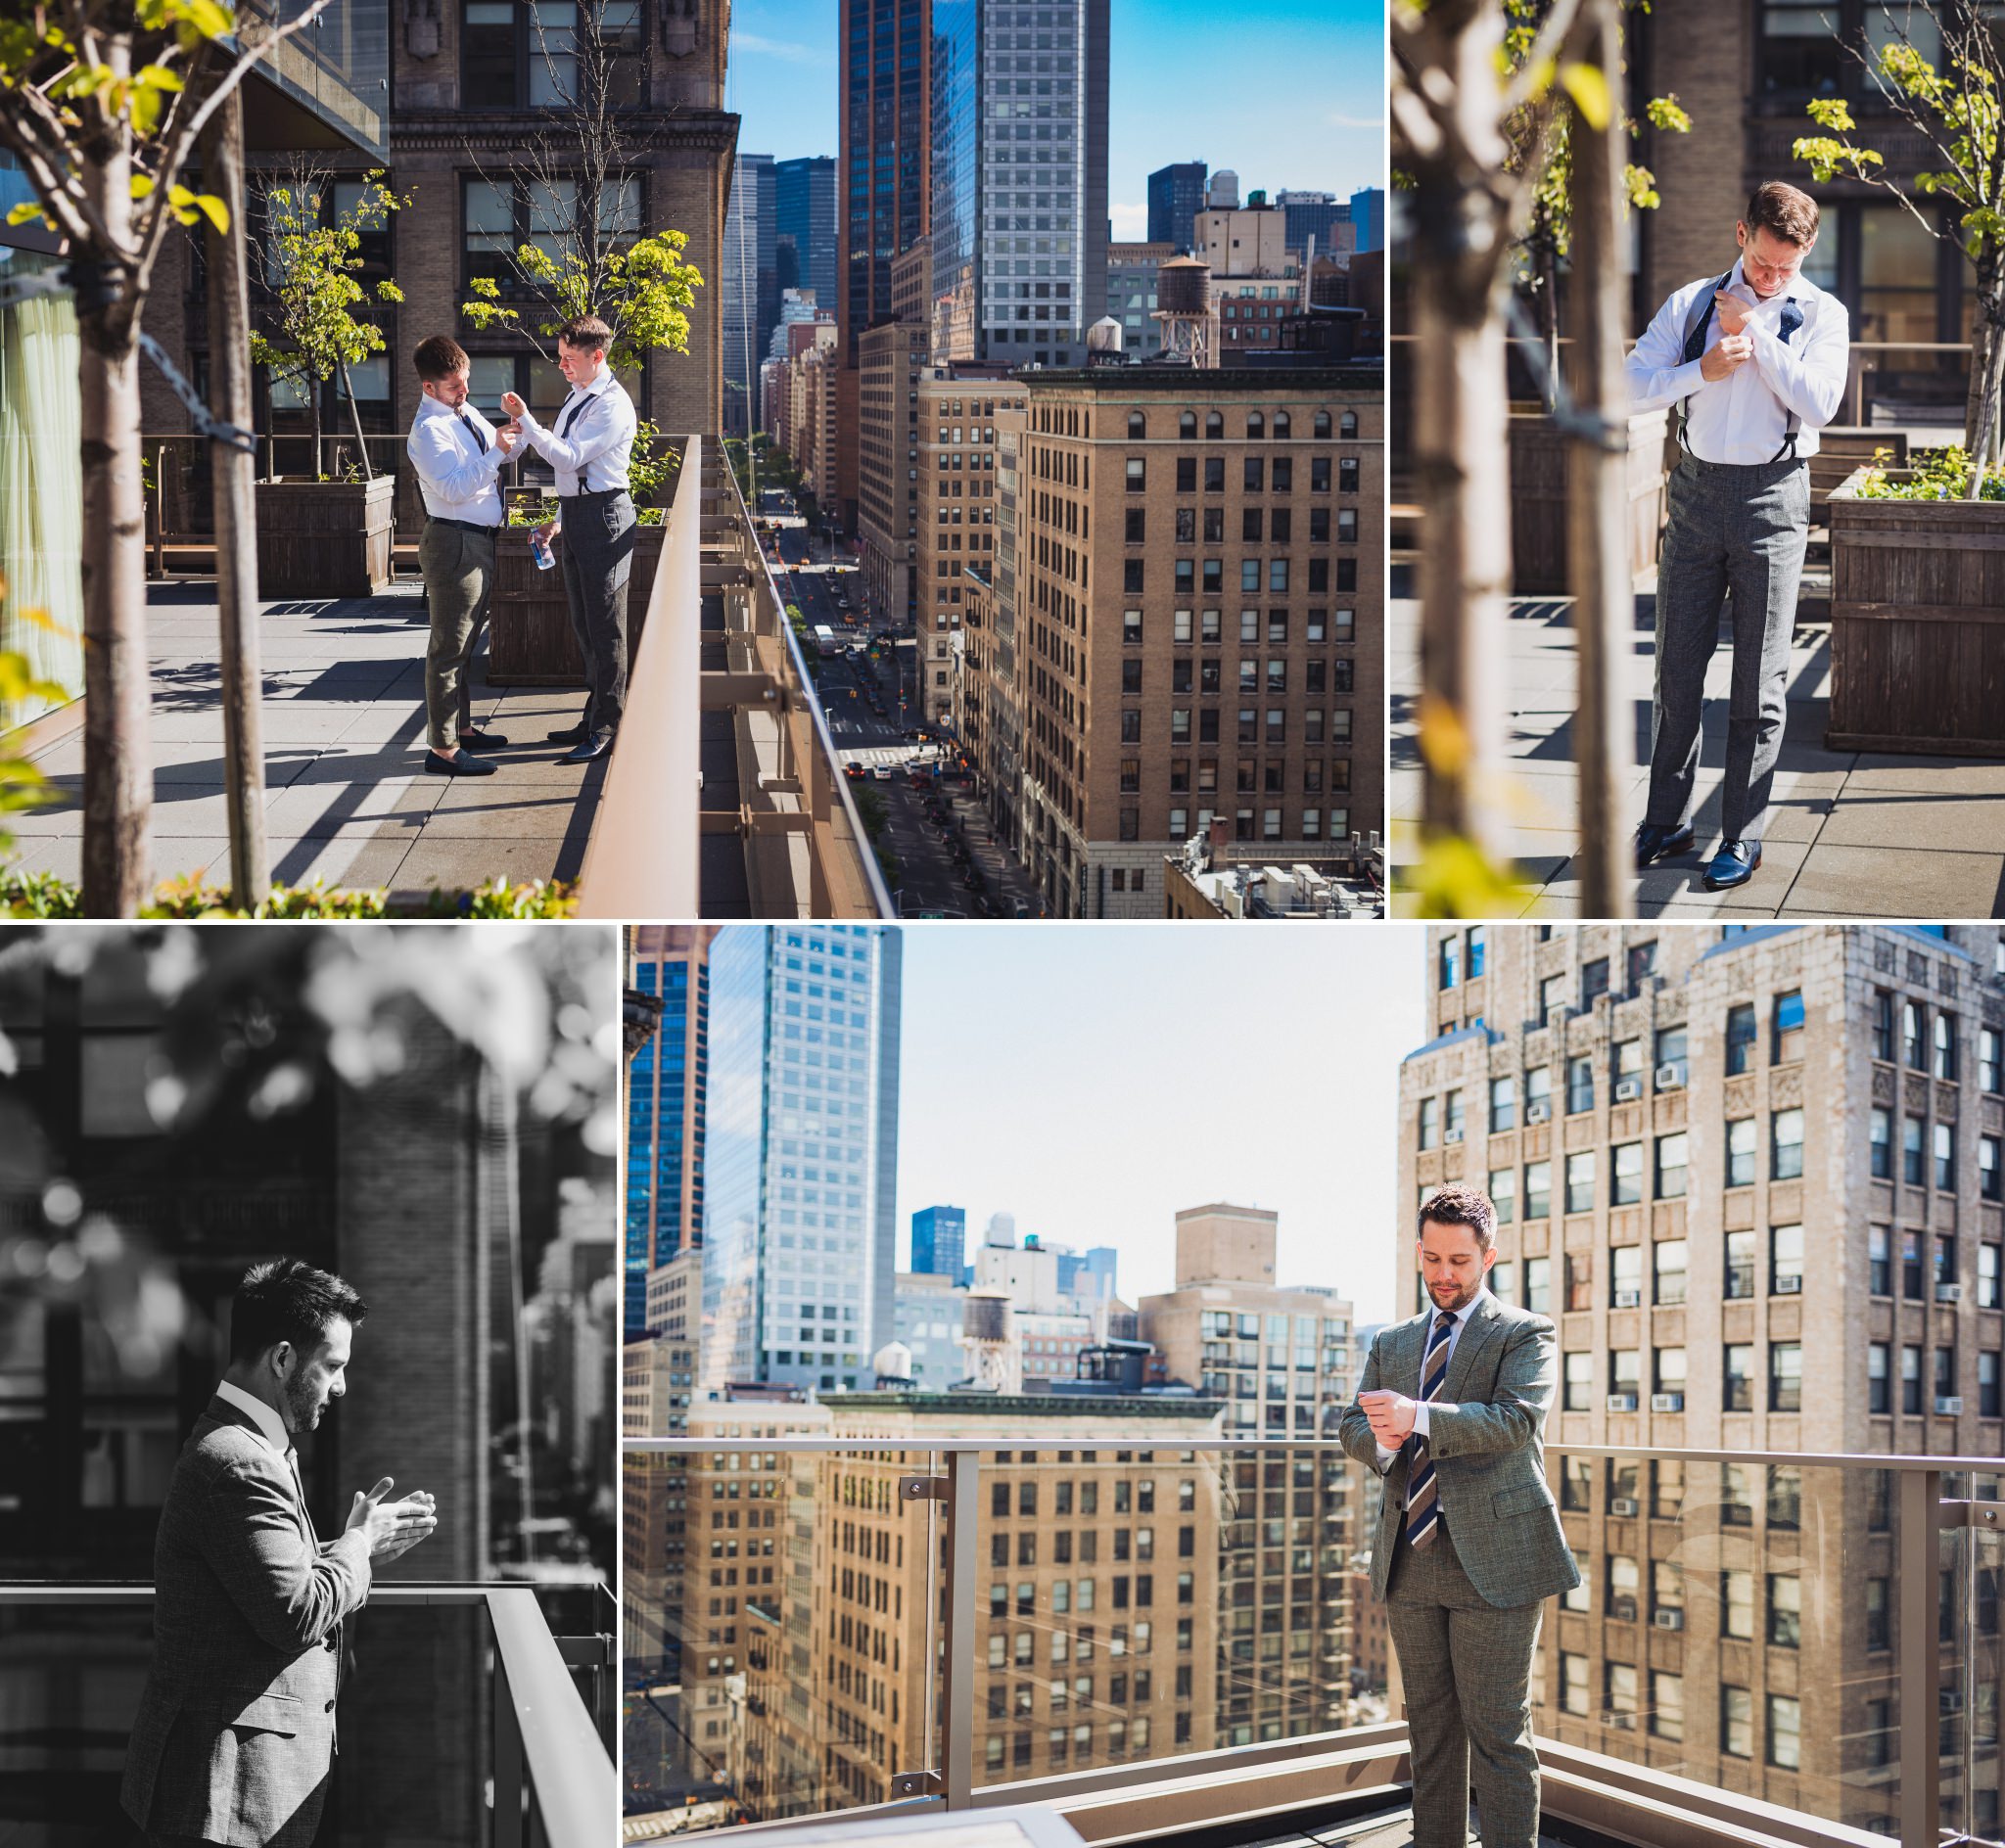  scenes from Brian and Scott's New York wedding, where they got ready together at the Royalton Park Avenue Hotel in Manhattan, New York.

For preparation photos, I like to get out of the way, and slowly ease my clients into having cameras photographi